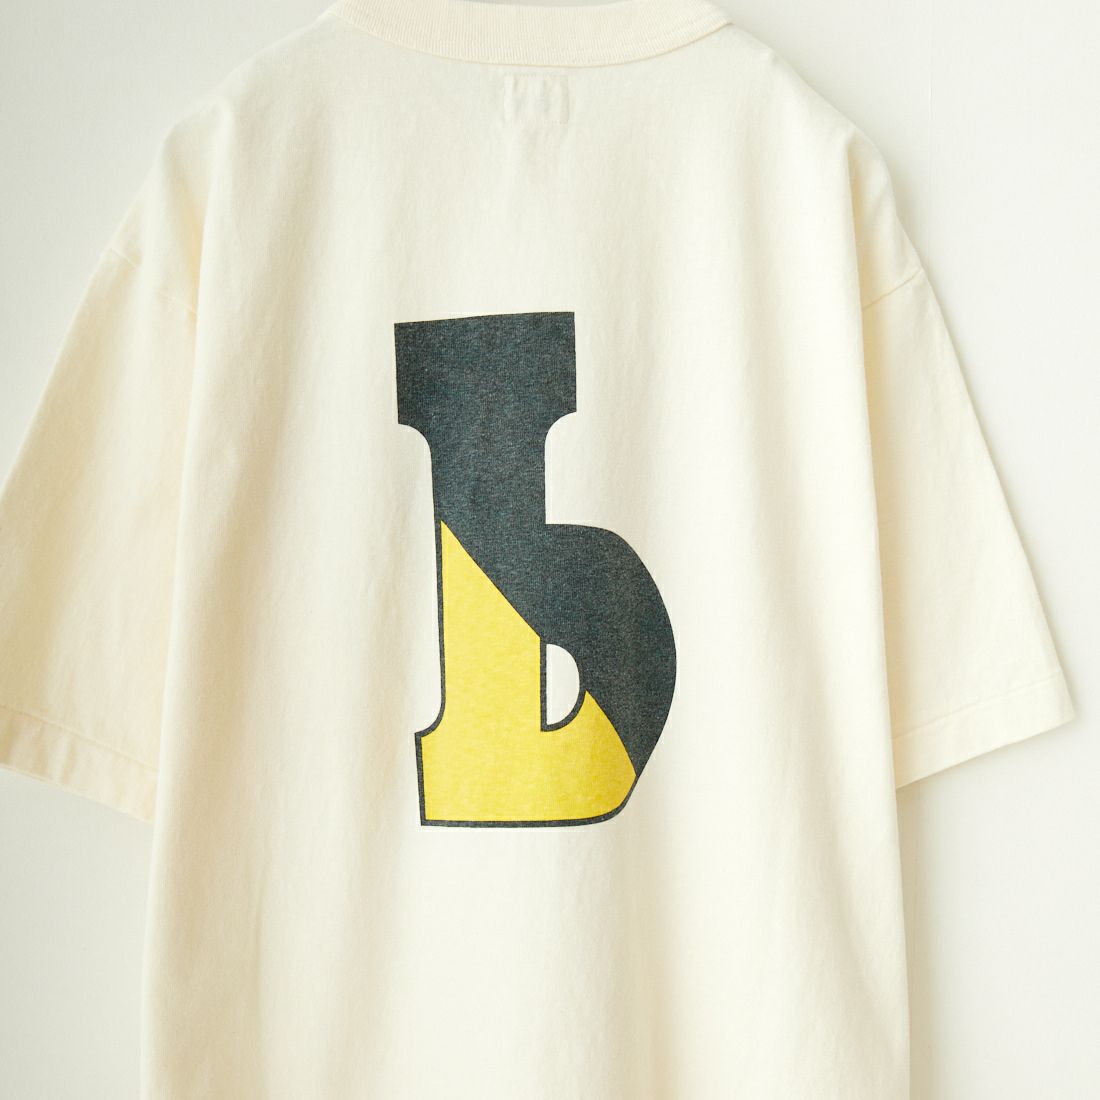 blurhms ROOTSTOCK [ブラームス ルーツストック] スタンダード プリントTシャツ [BROOTS24S26D] 01 IVORY